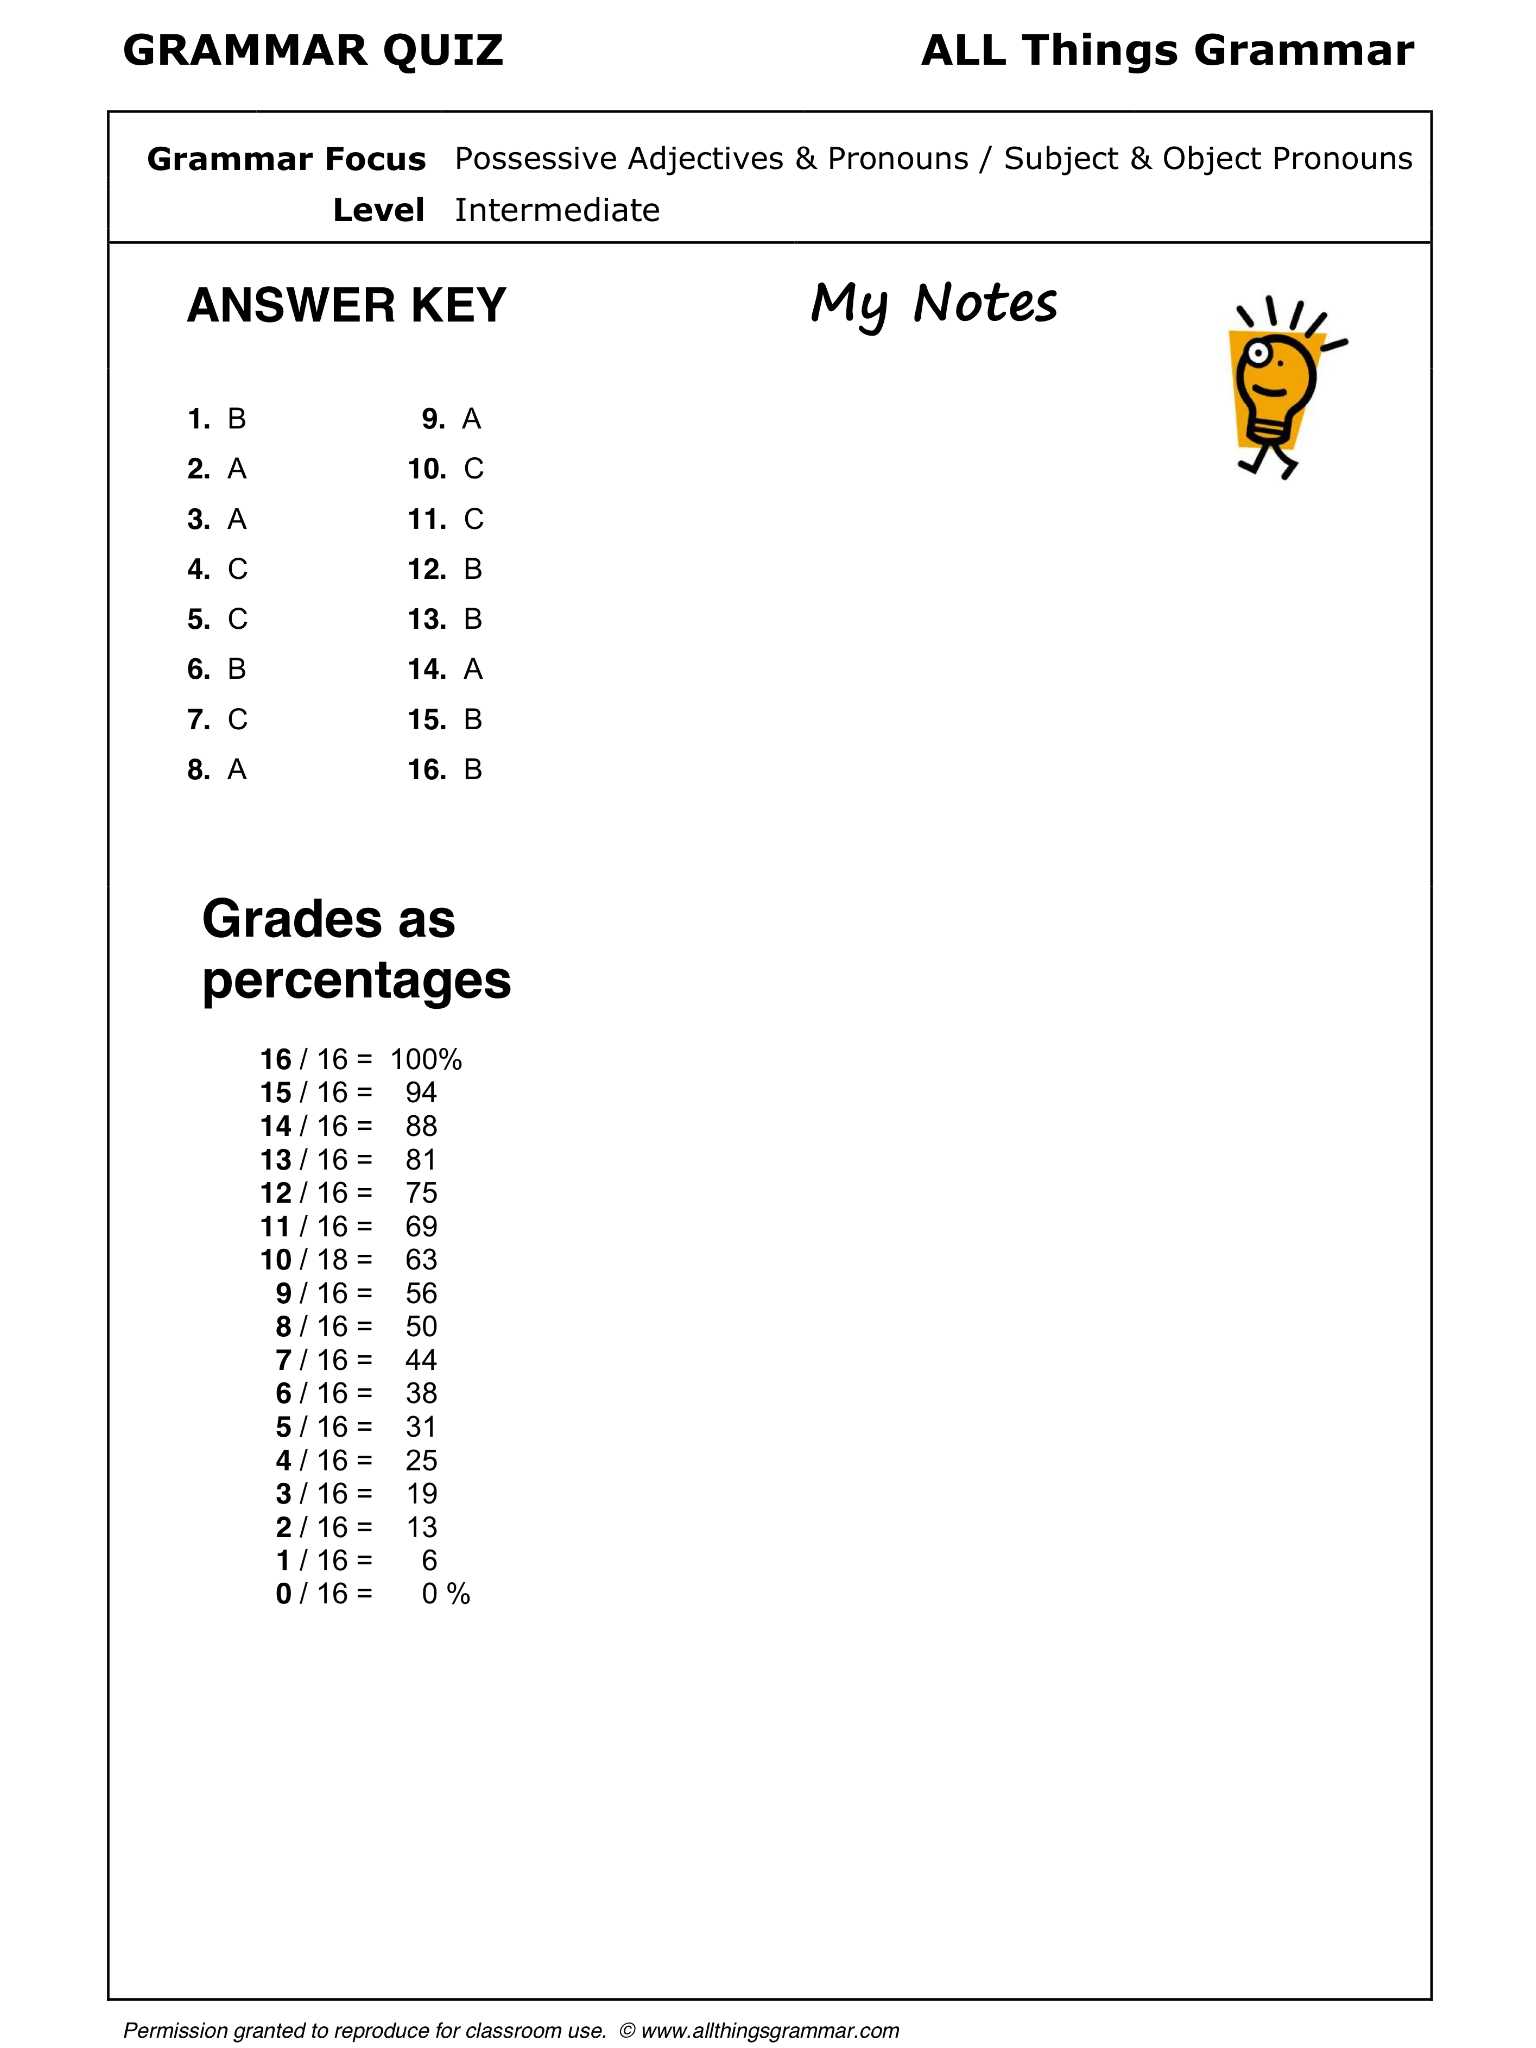 Adjectives Worksheets for Kindergarten or English Grammar Possessive Adjectives & Pronouns Subject & Object